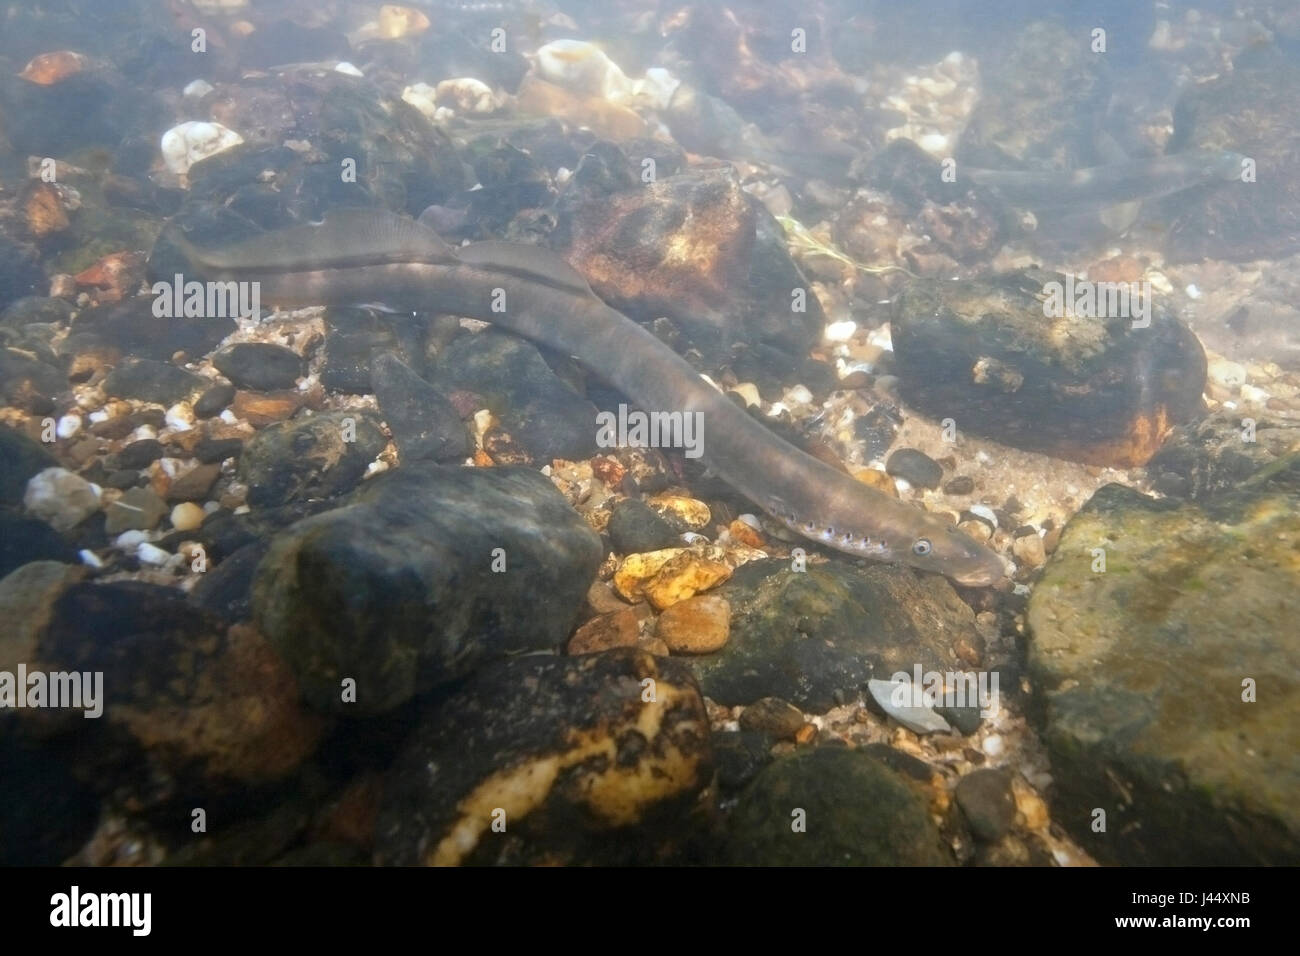 river lamprey in the Netherlands Stock Photo